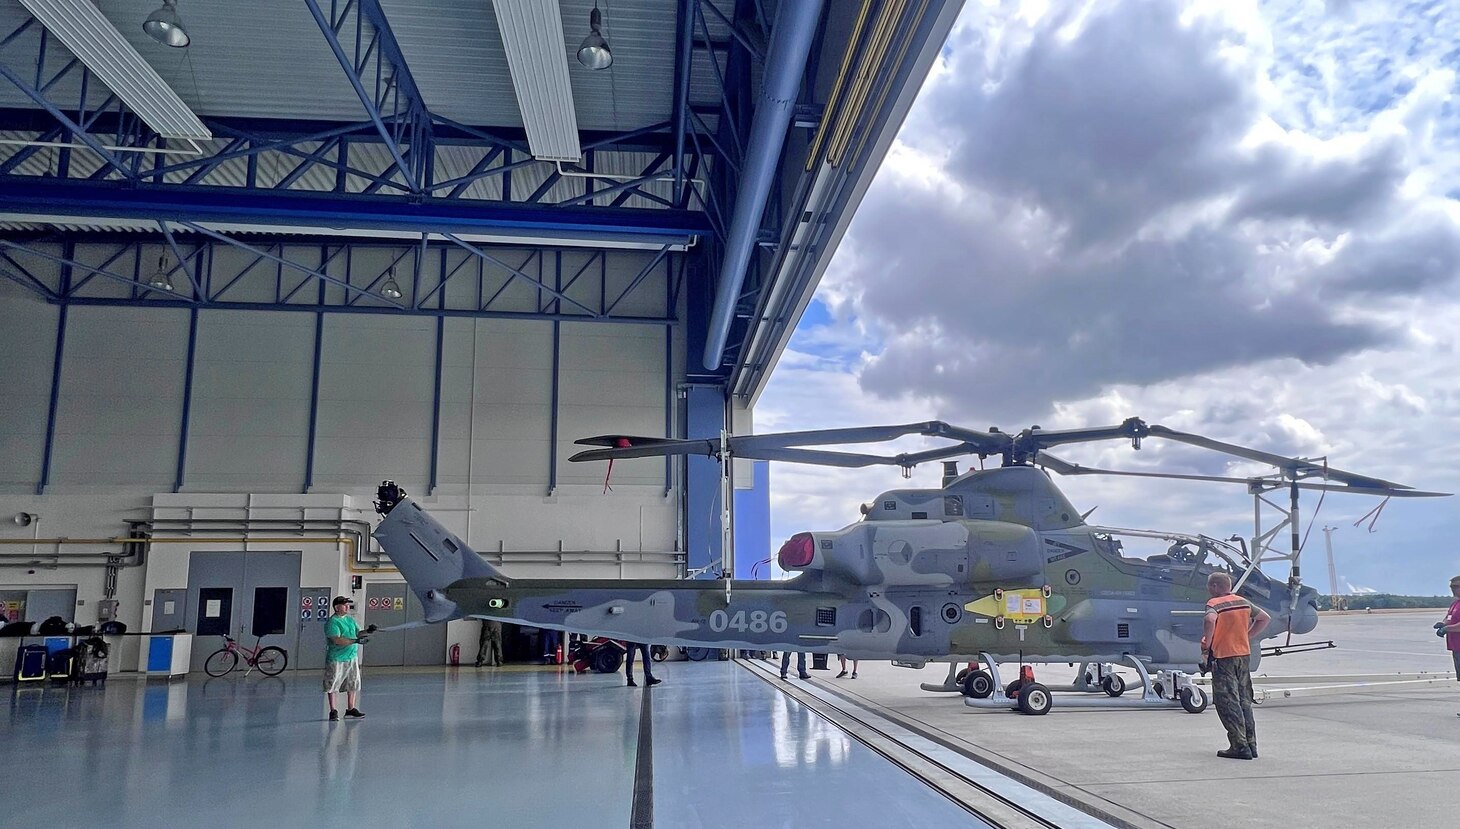 One of two AH-1Z Viper sits in the hangar after arriving in the Czech Republic. Czech Republic selected the H-1 to modernize the country’s armed forces and strengthen its homeland defense.